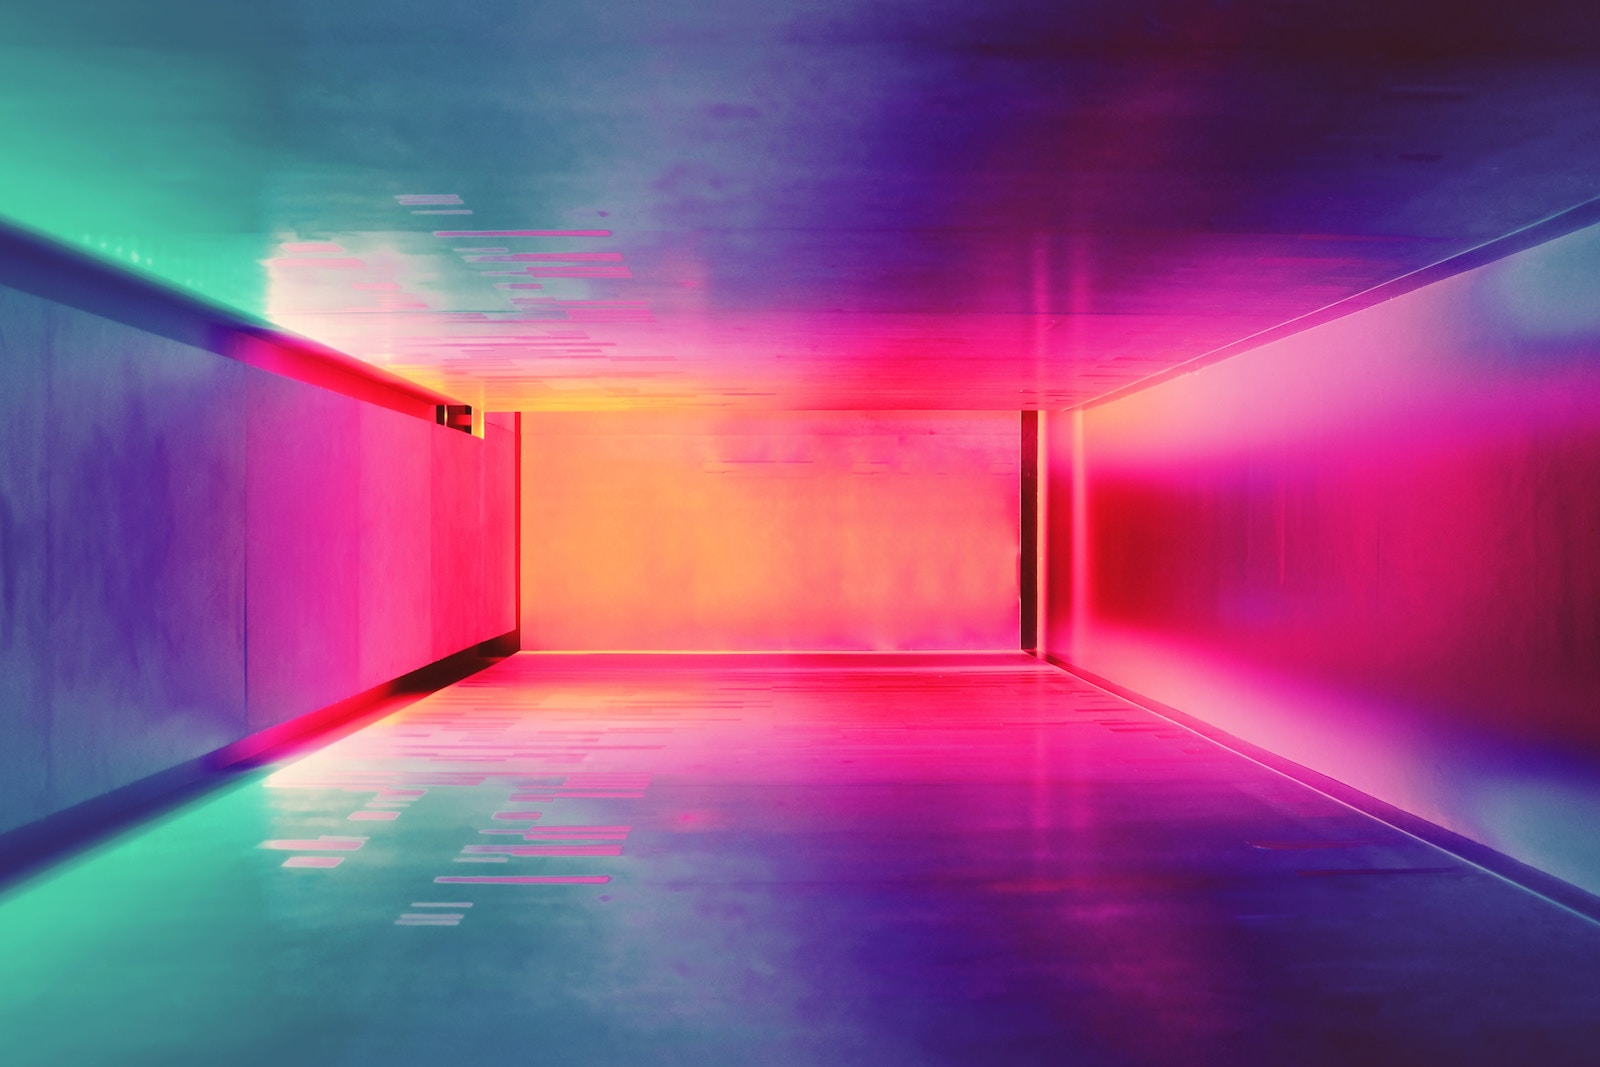 Hallway covered in soft colorful light creating a pink and teal gradient.